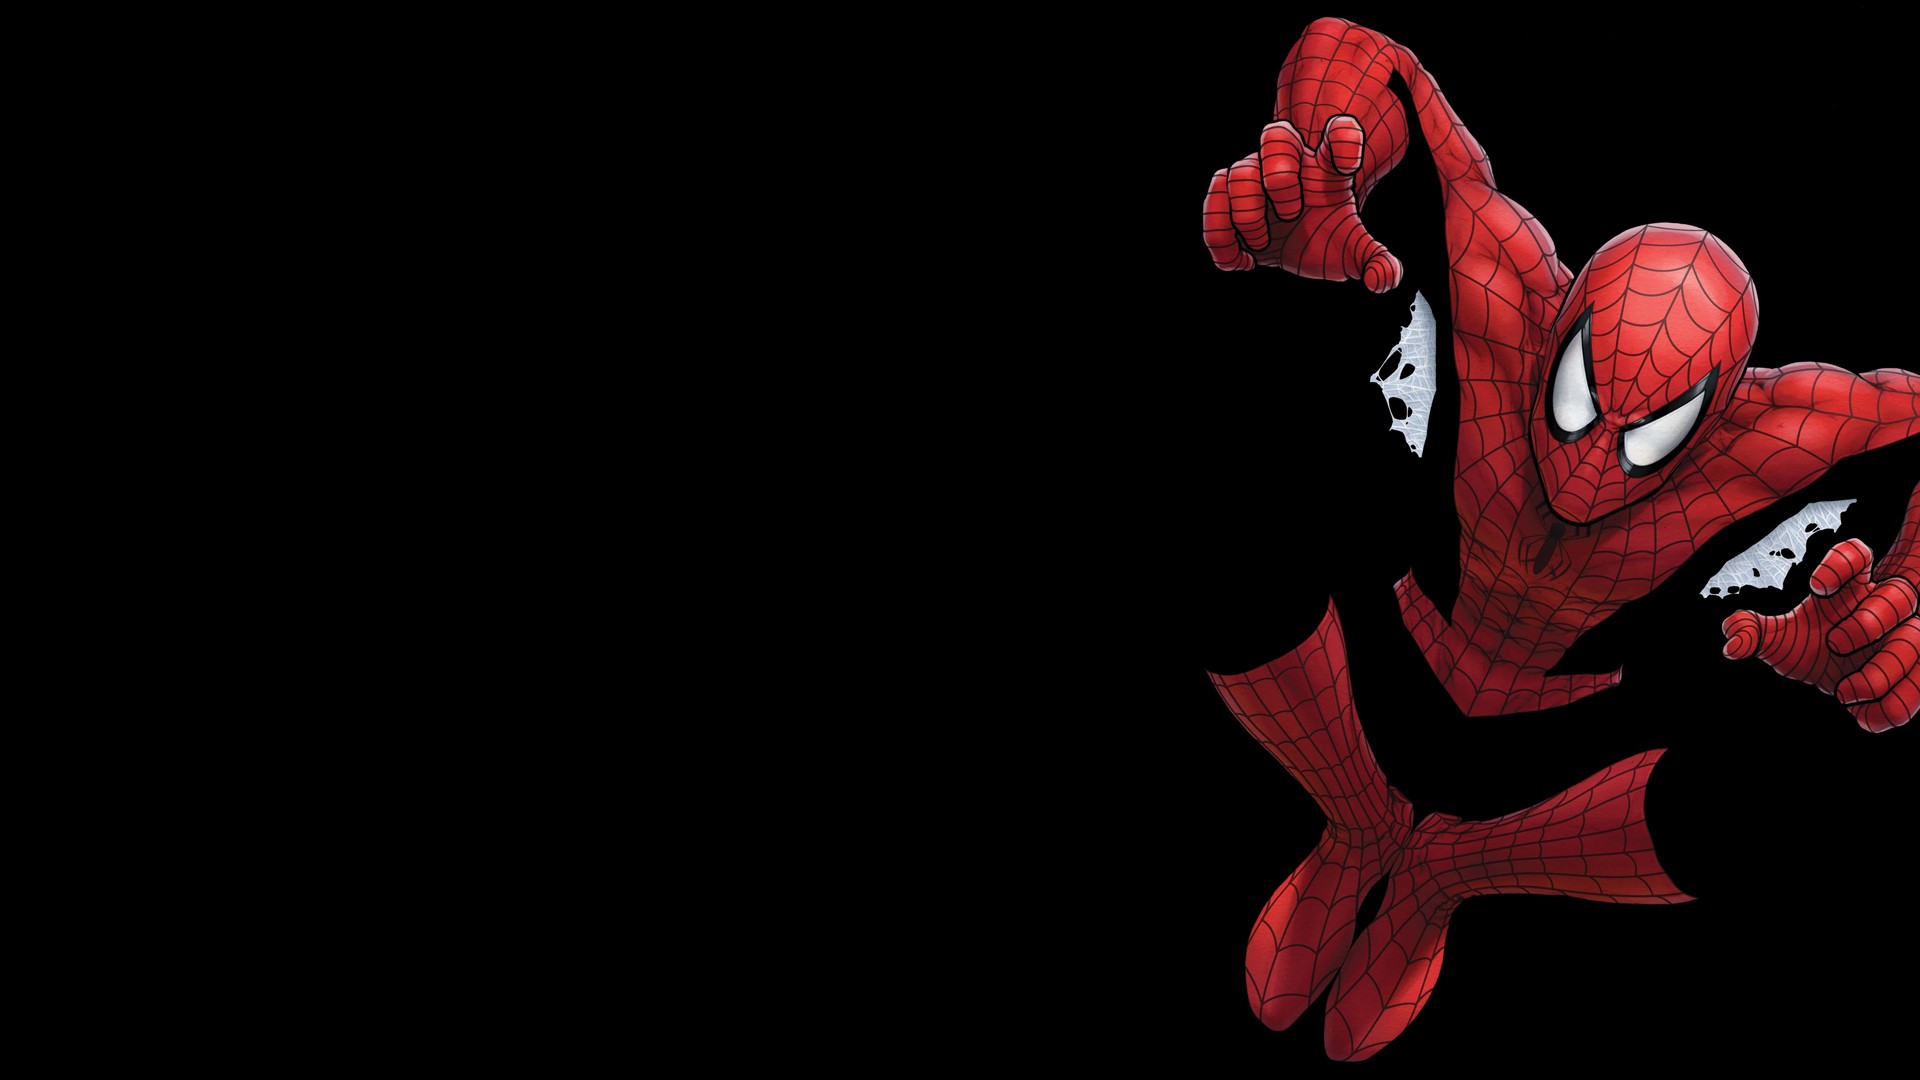 Spiderman Wallpaper Games Daily